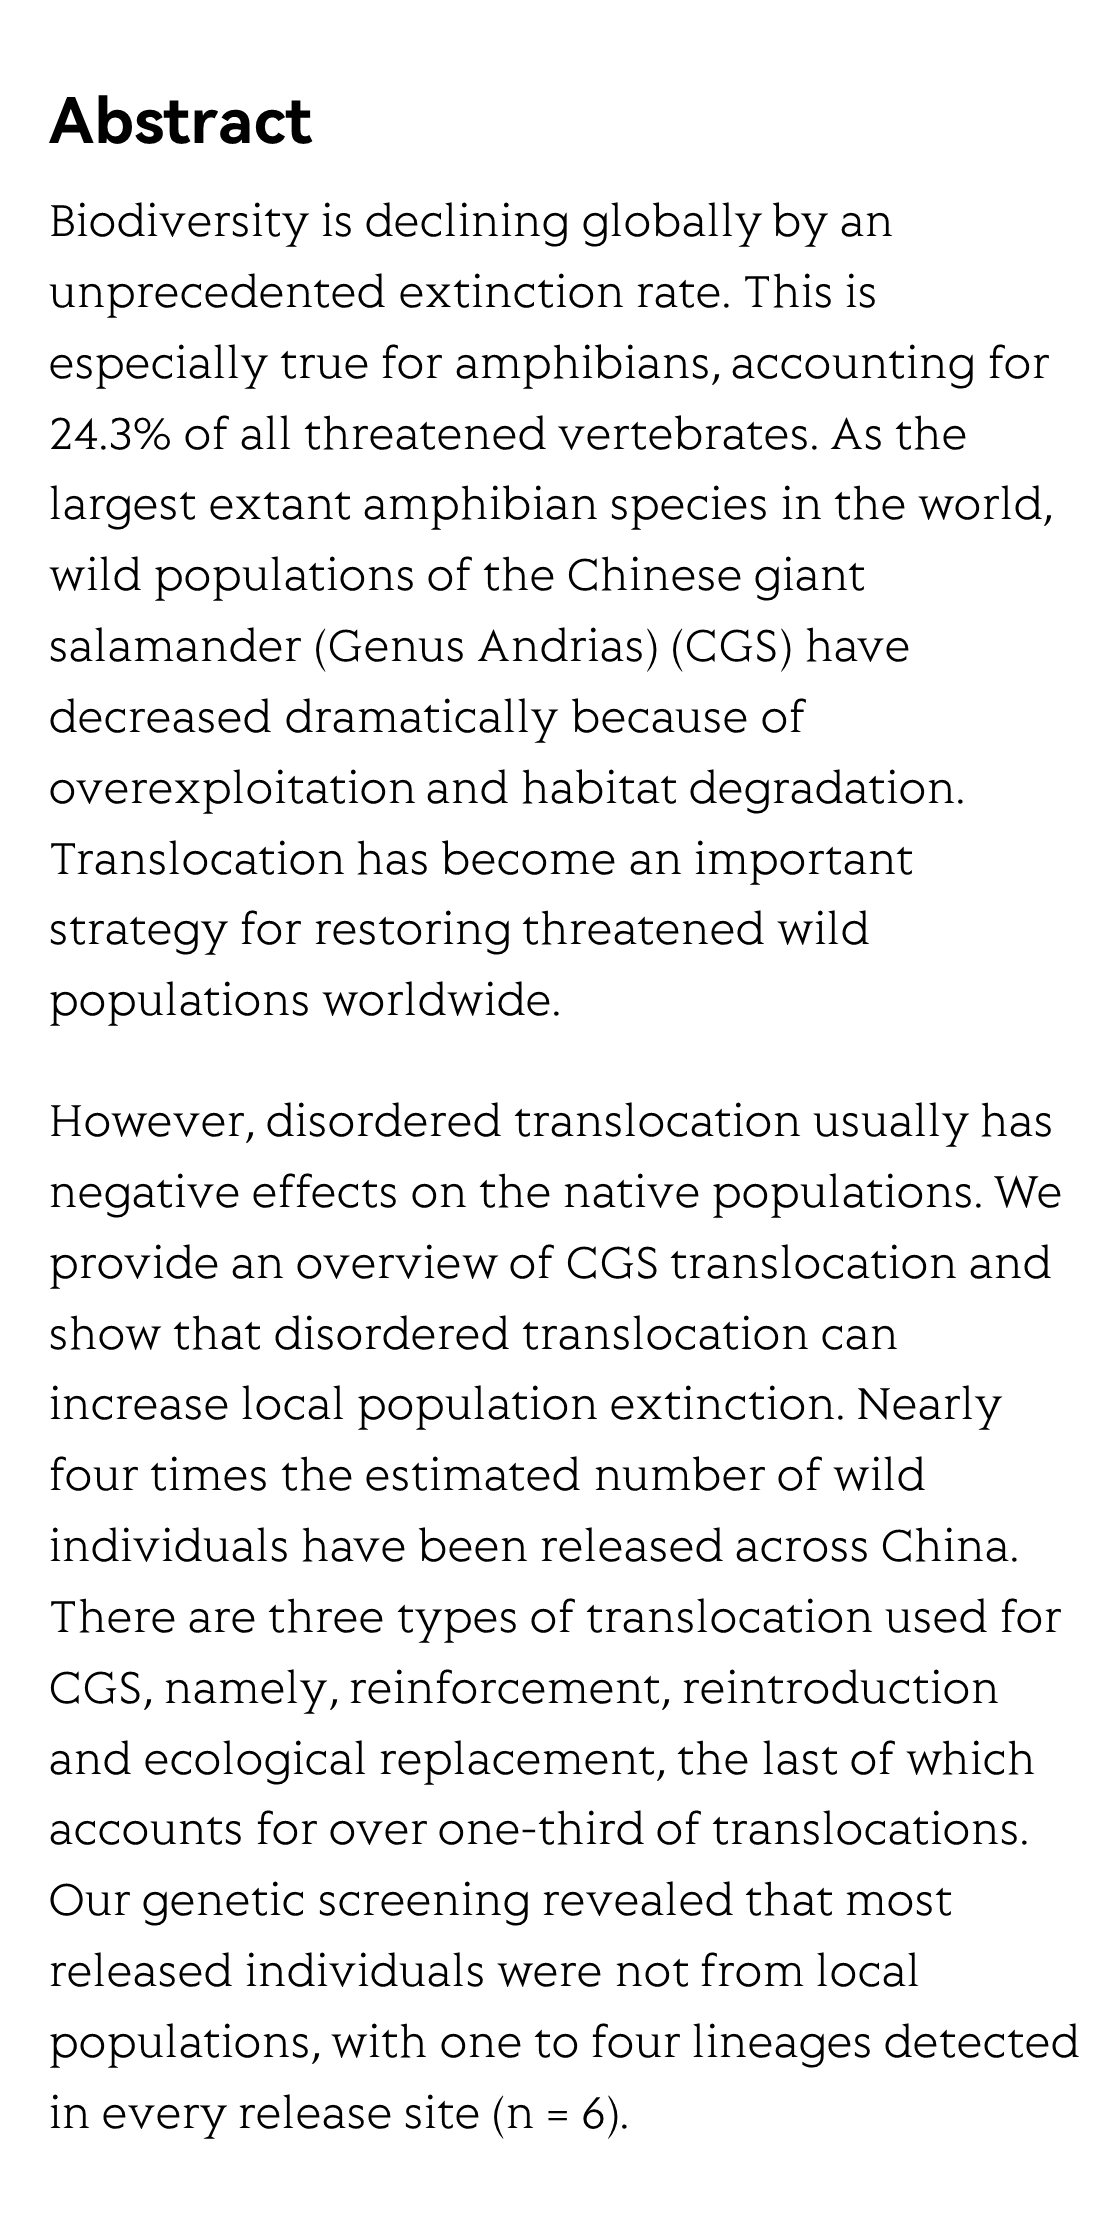 Disordered Translocation is Hastening Local Extinction of the Chinese Giant Salamander_2